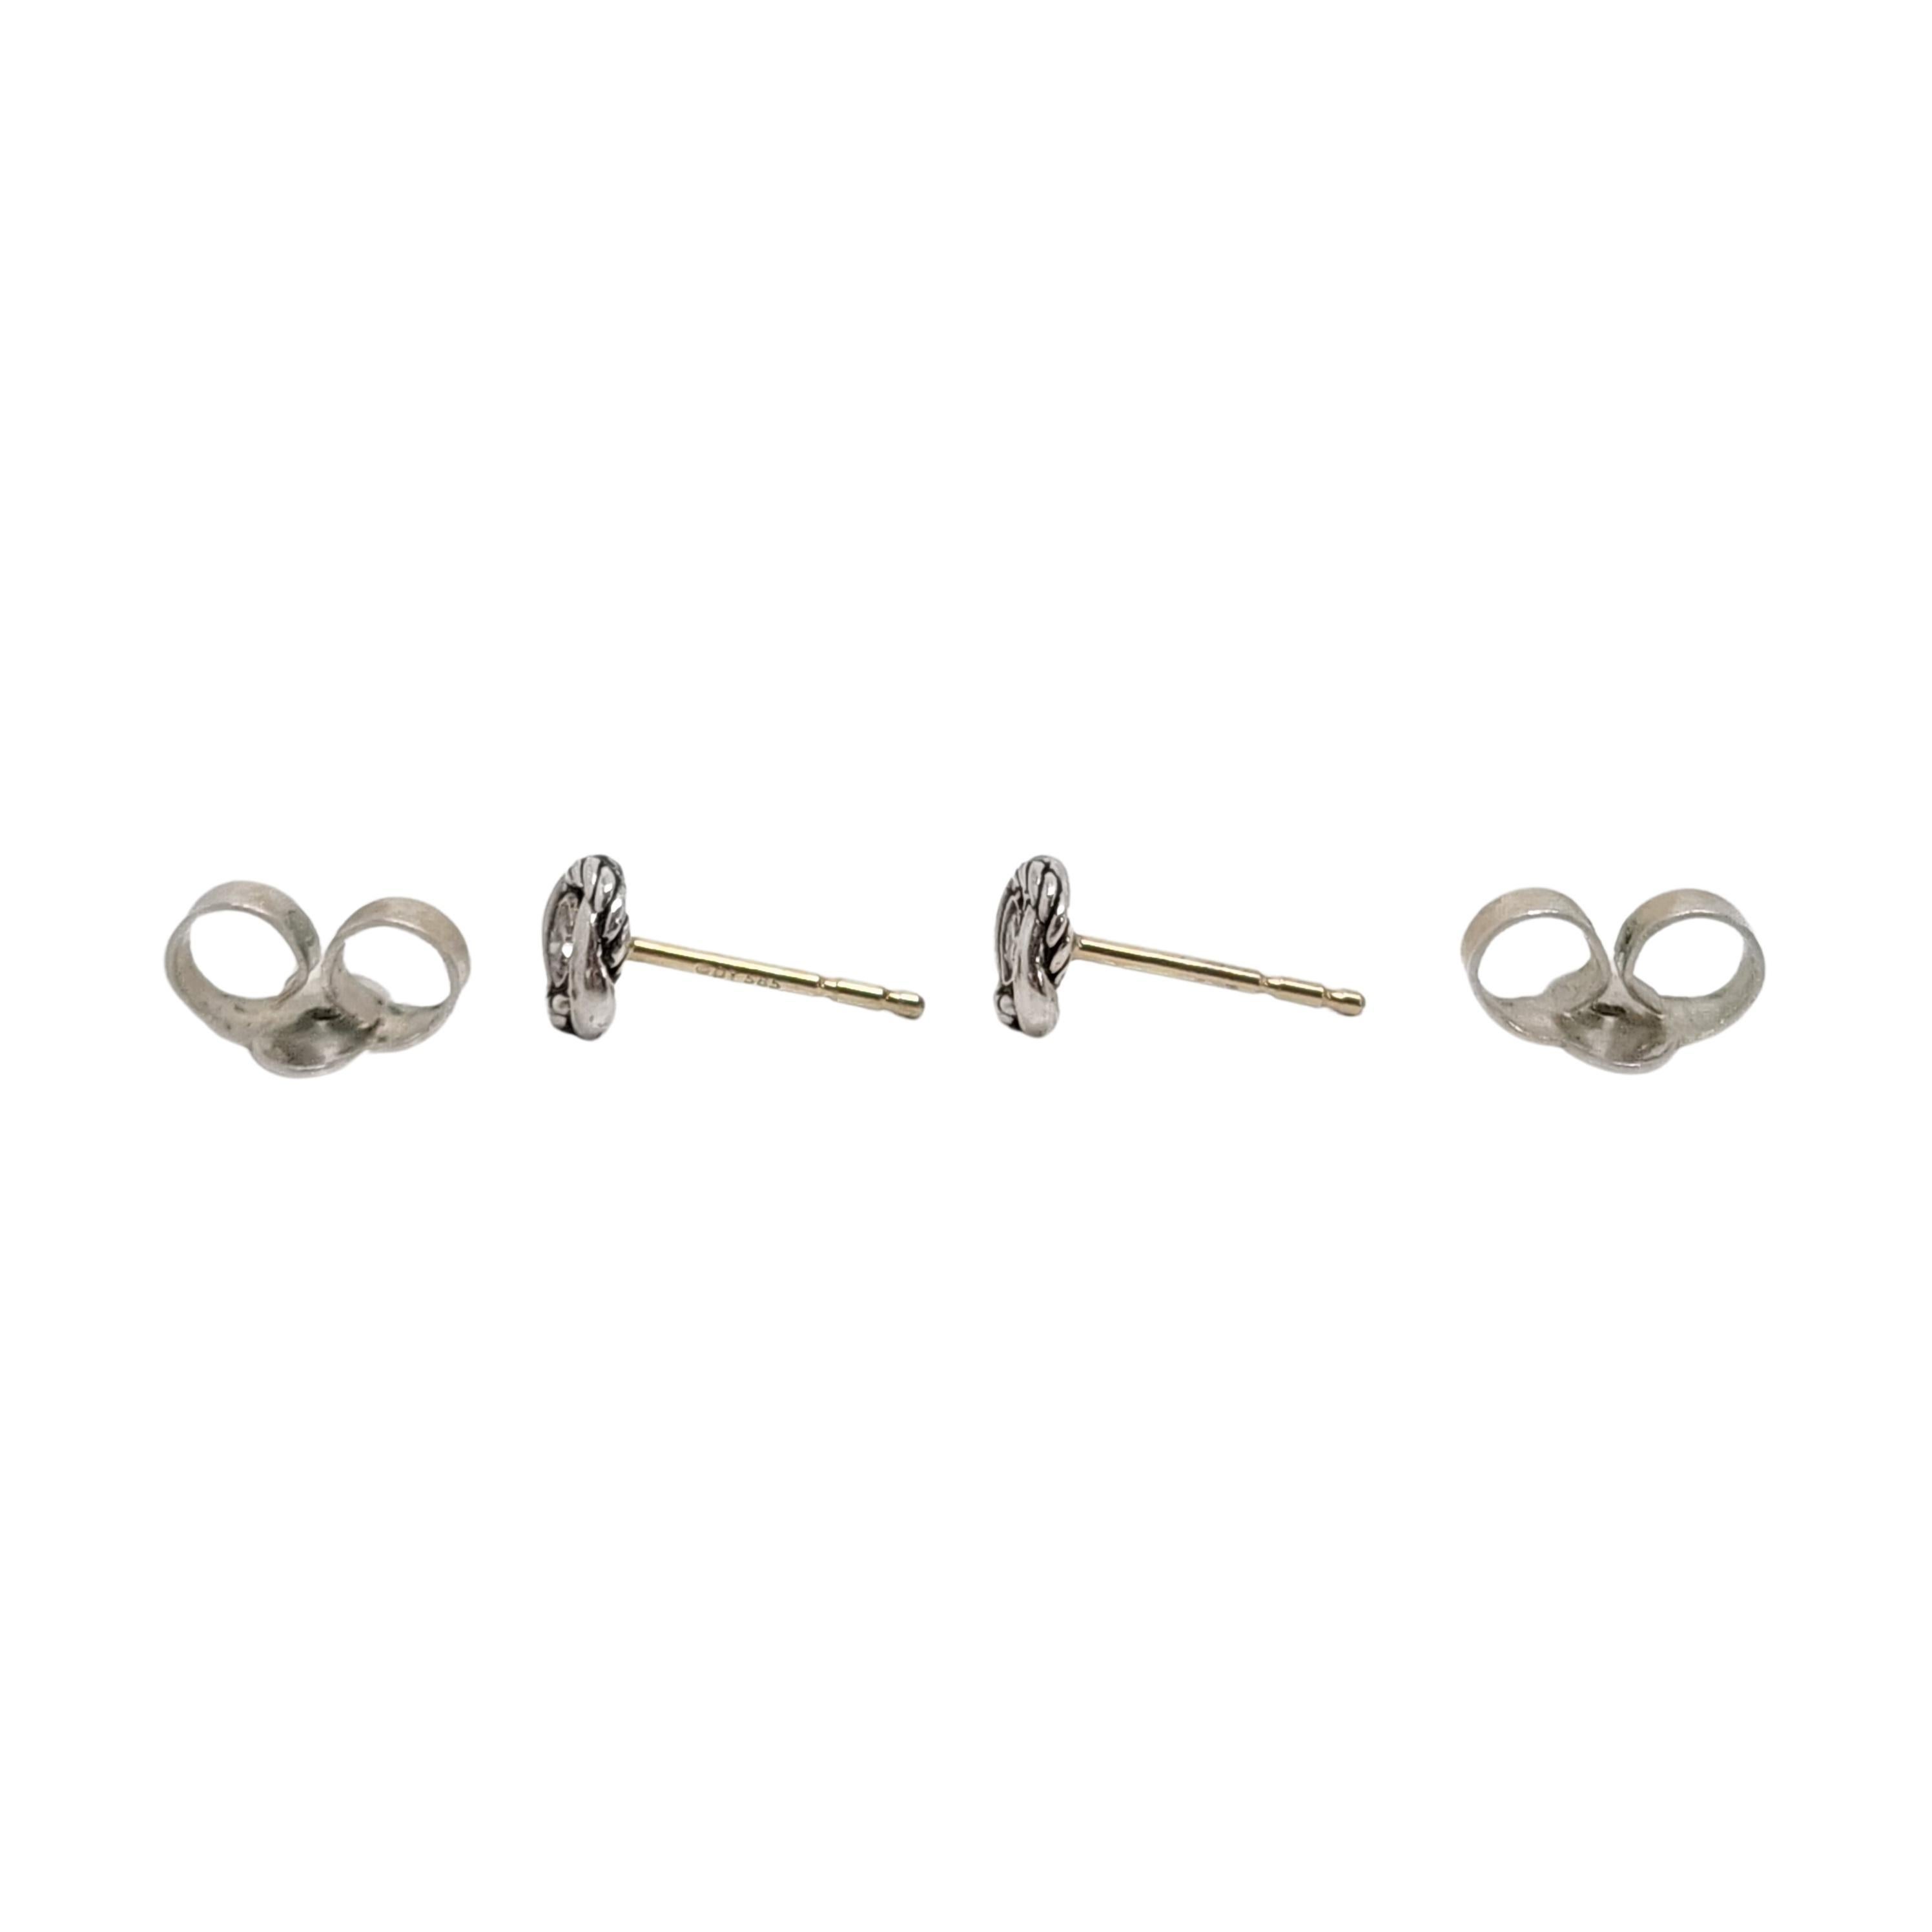 David Yurman sterling silver 14K yellow gold posts Infinity Diamond Stud Earrings.

Sterling silver infinity knot design surrounds small round diamonds on the small stud earrings by David Yurman. 14K yellow gold posts.

Measures approx 6.8mm x 6.8mm